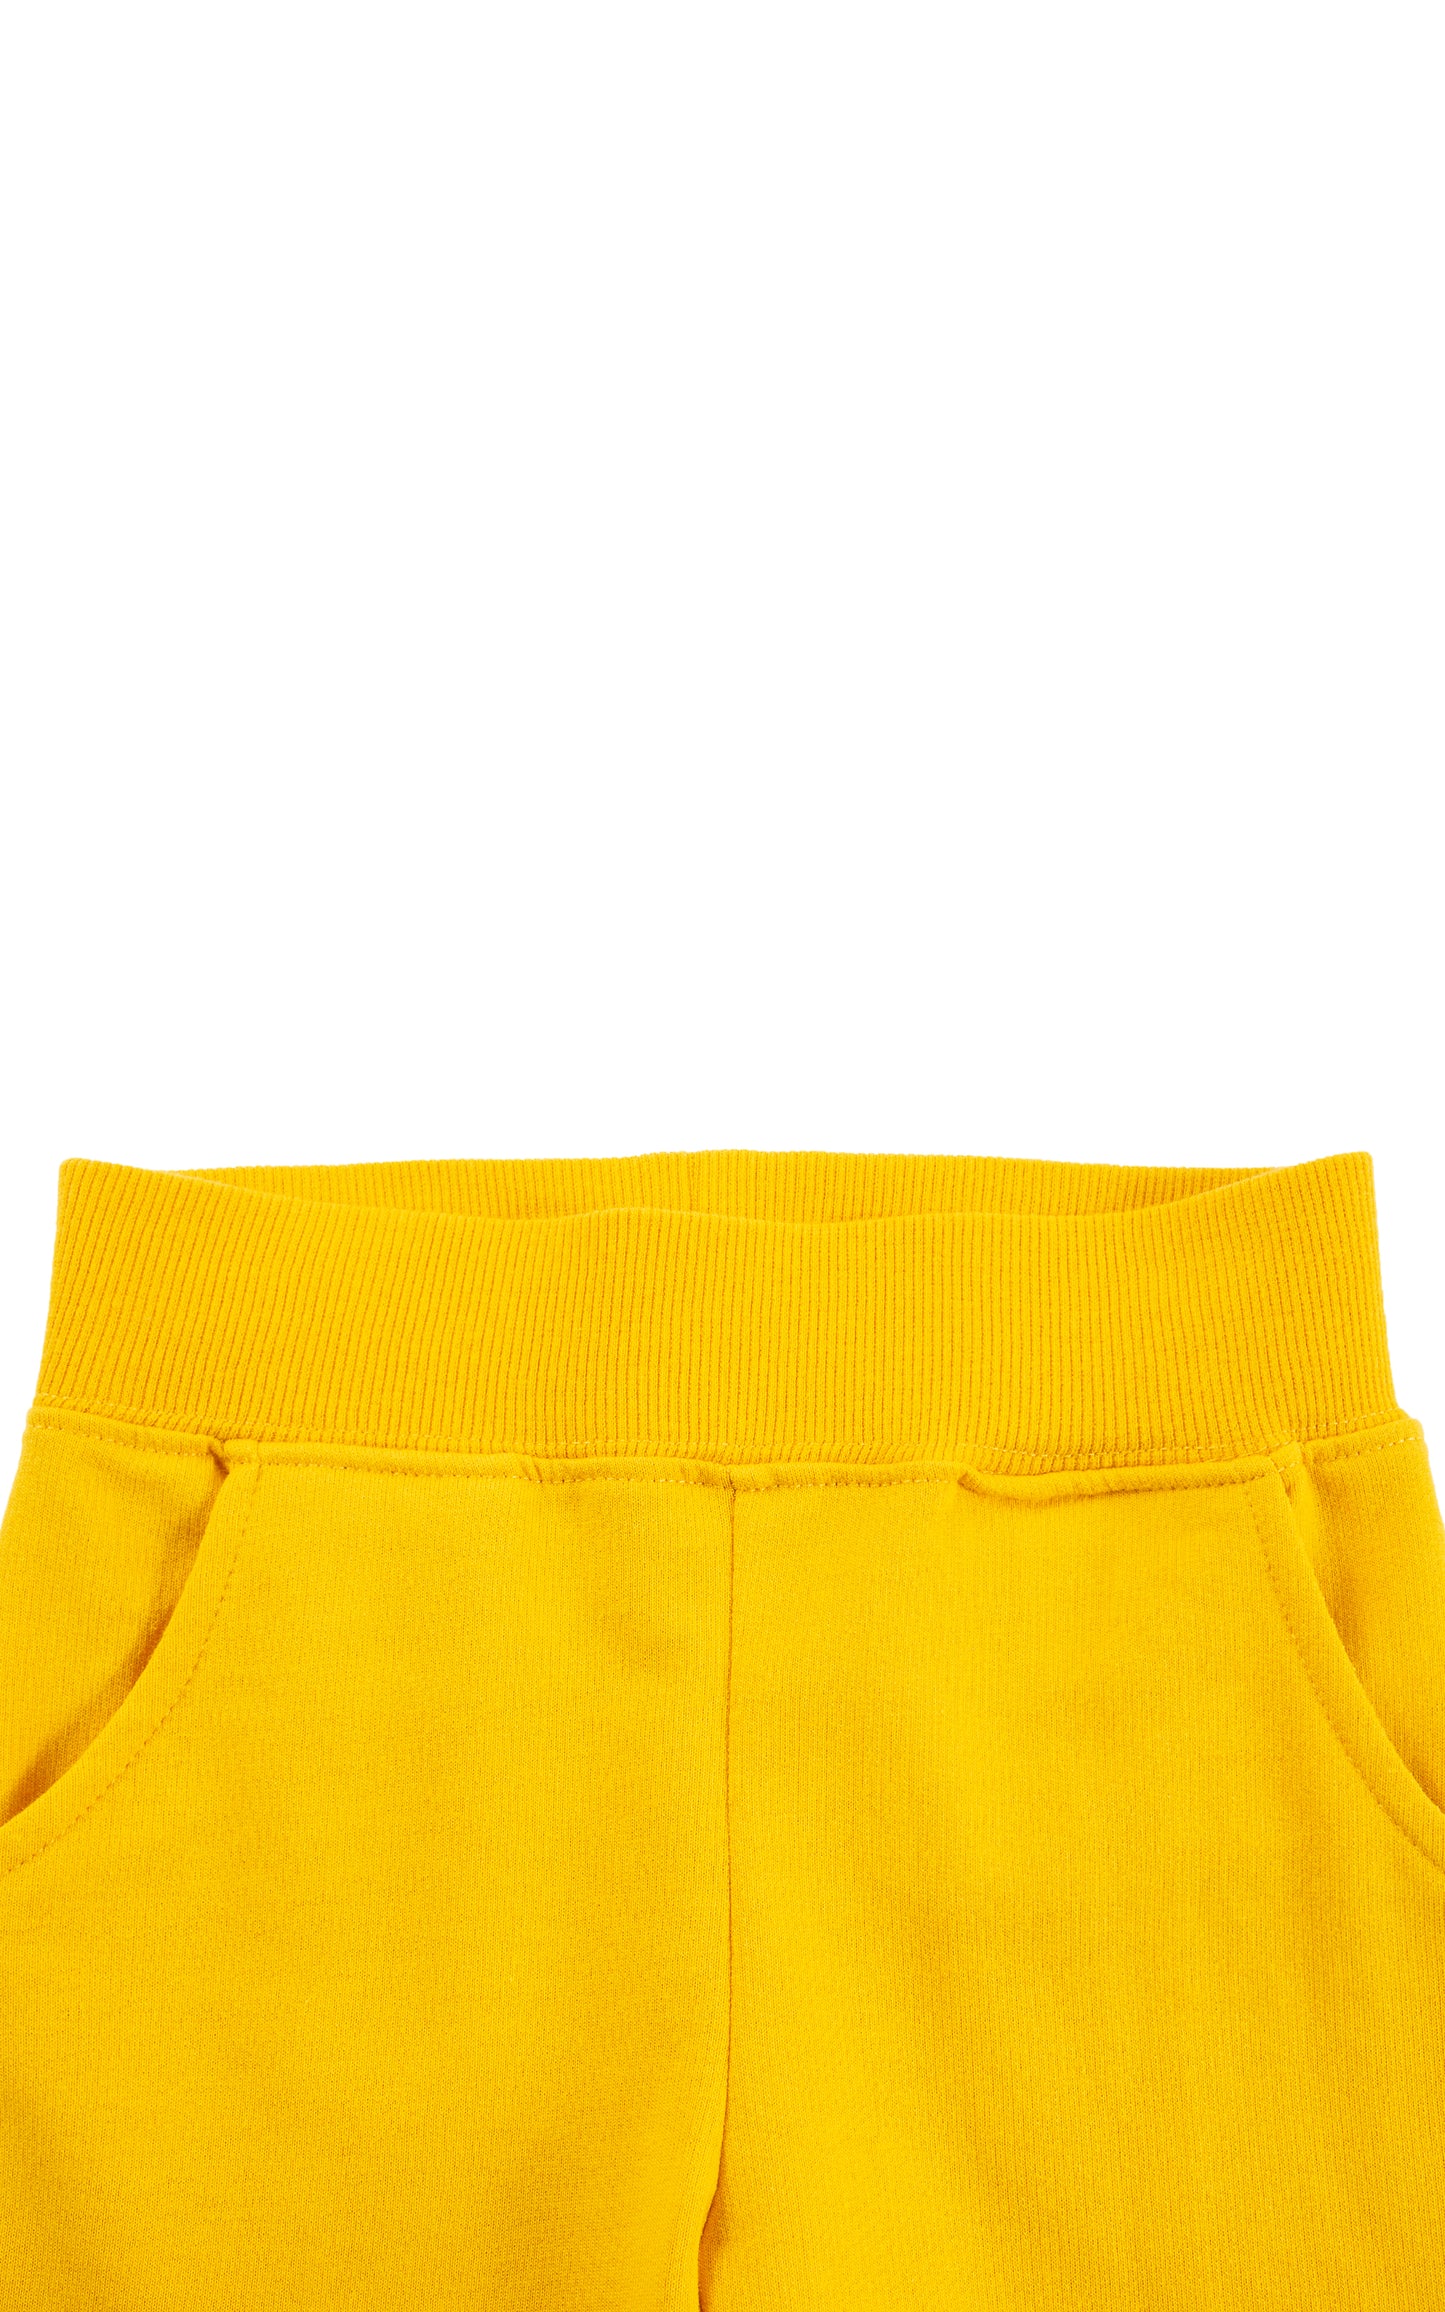 Close up of bright yellow sweatpants with wide elastic ribbed waistband